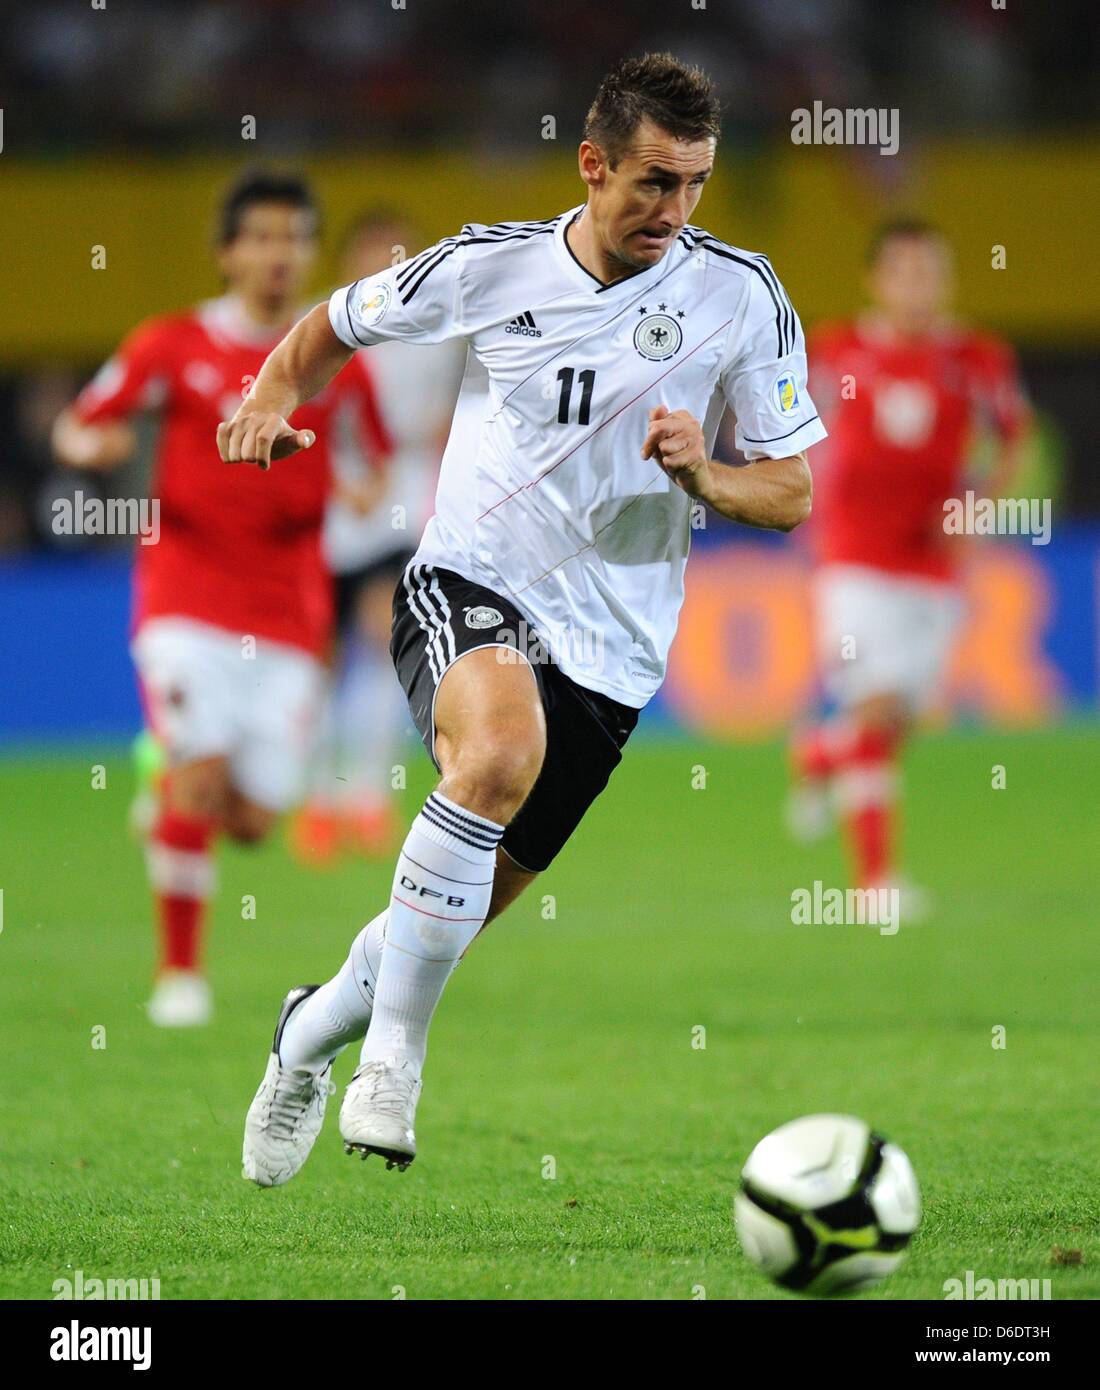 Germany's Miroslav Klose plays the ball during the World Cup qualification match between Austria and Germany at Ernst-Happel-Stadium in Vienna, Germany, 11 September 2012. Photo: Thomas Eisenhuth Stock Photo